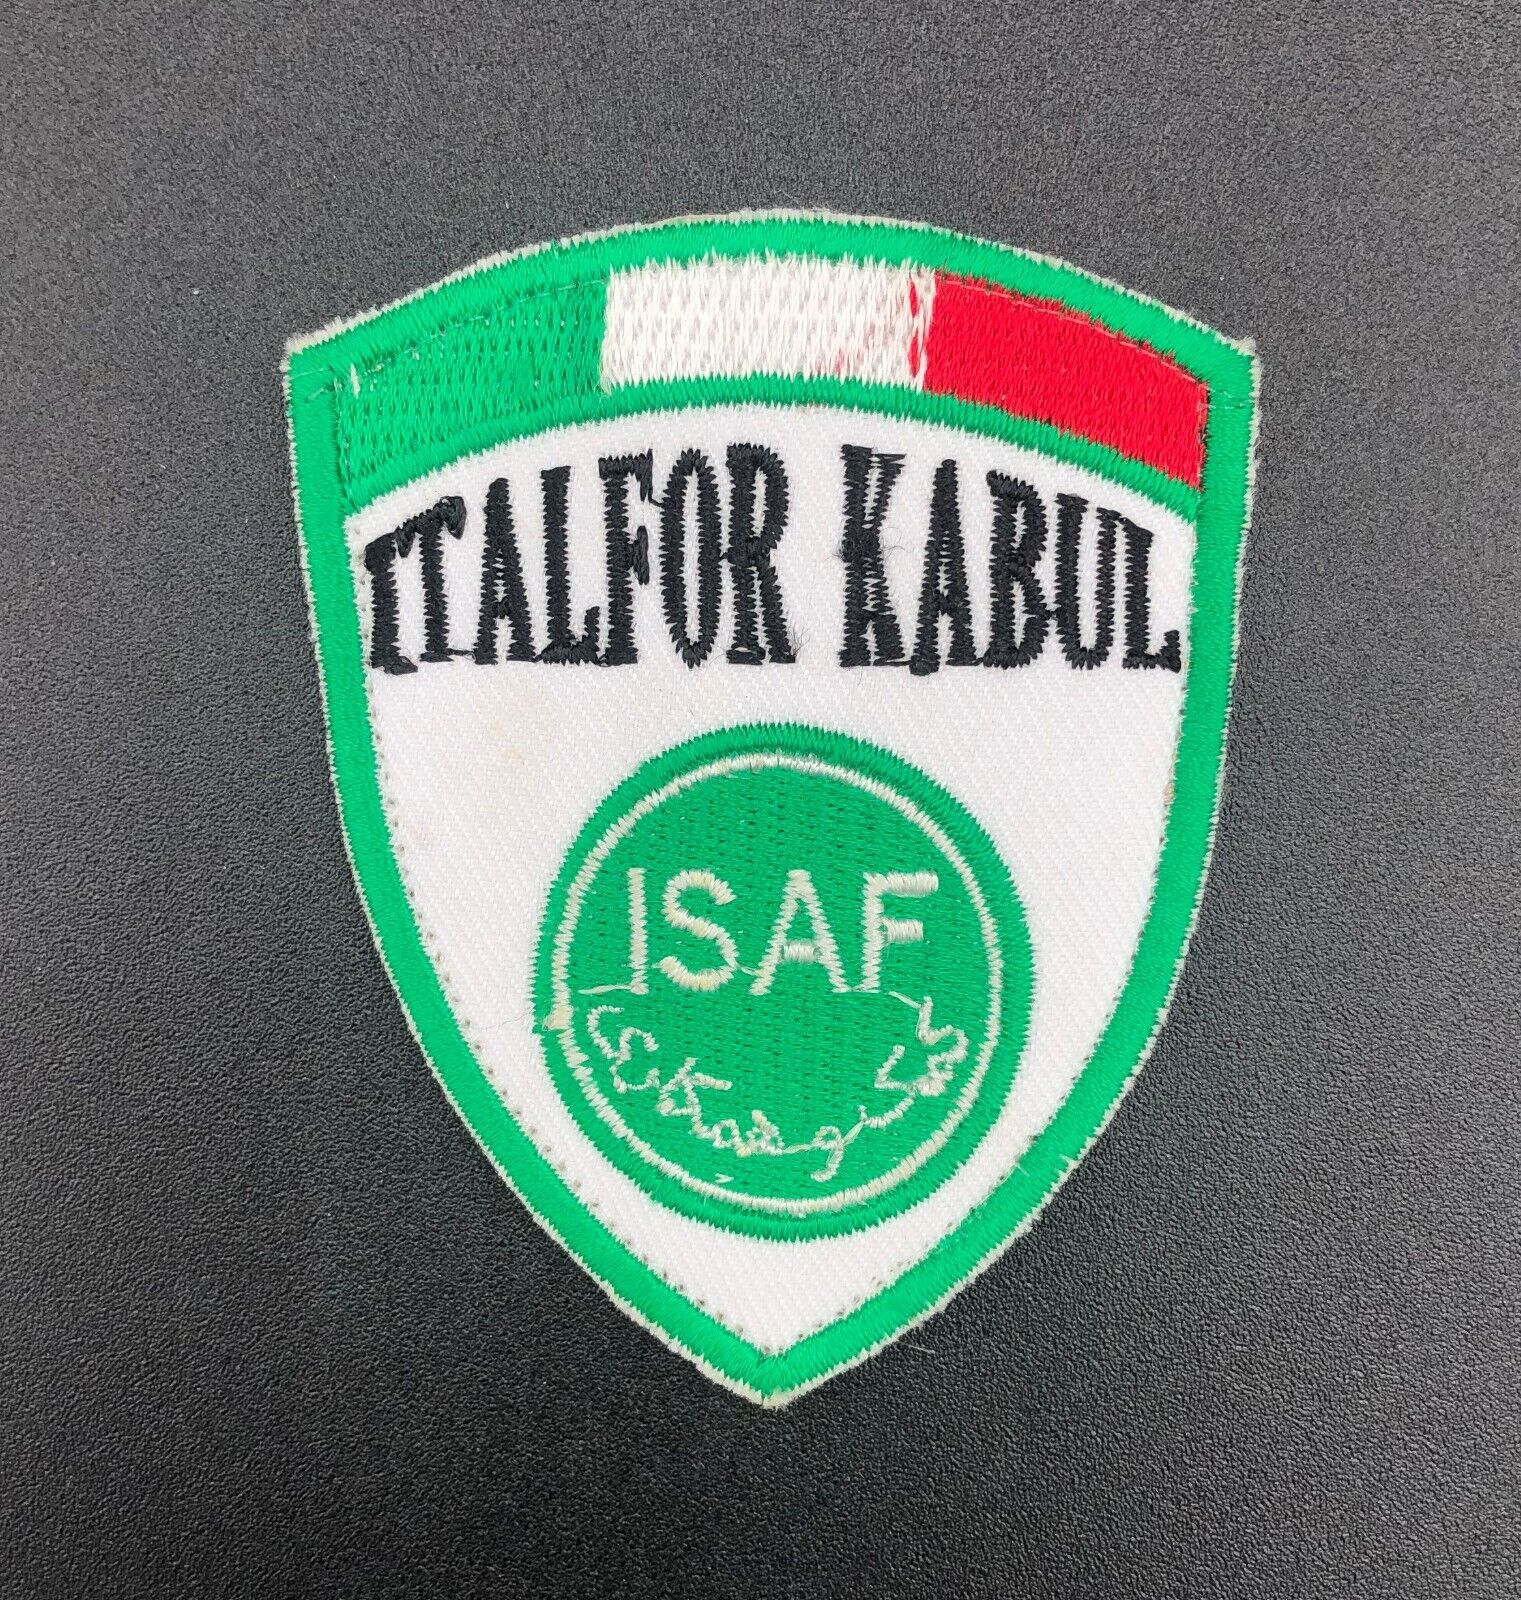 Italian Military ITALFOR Kabul Afghanistan ISAF Theatre Made Patch OIF OEF